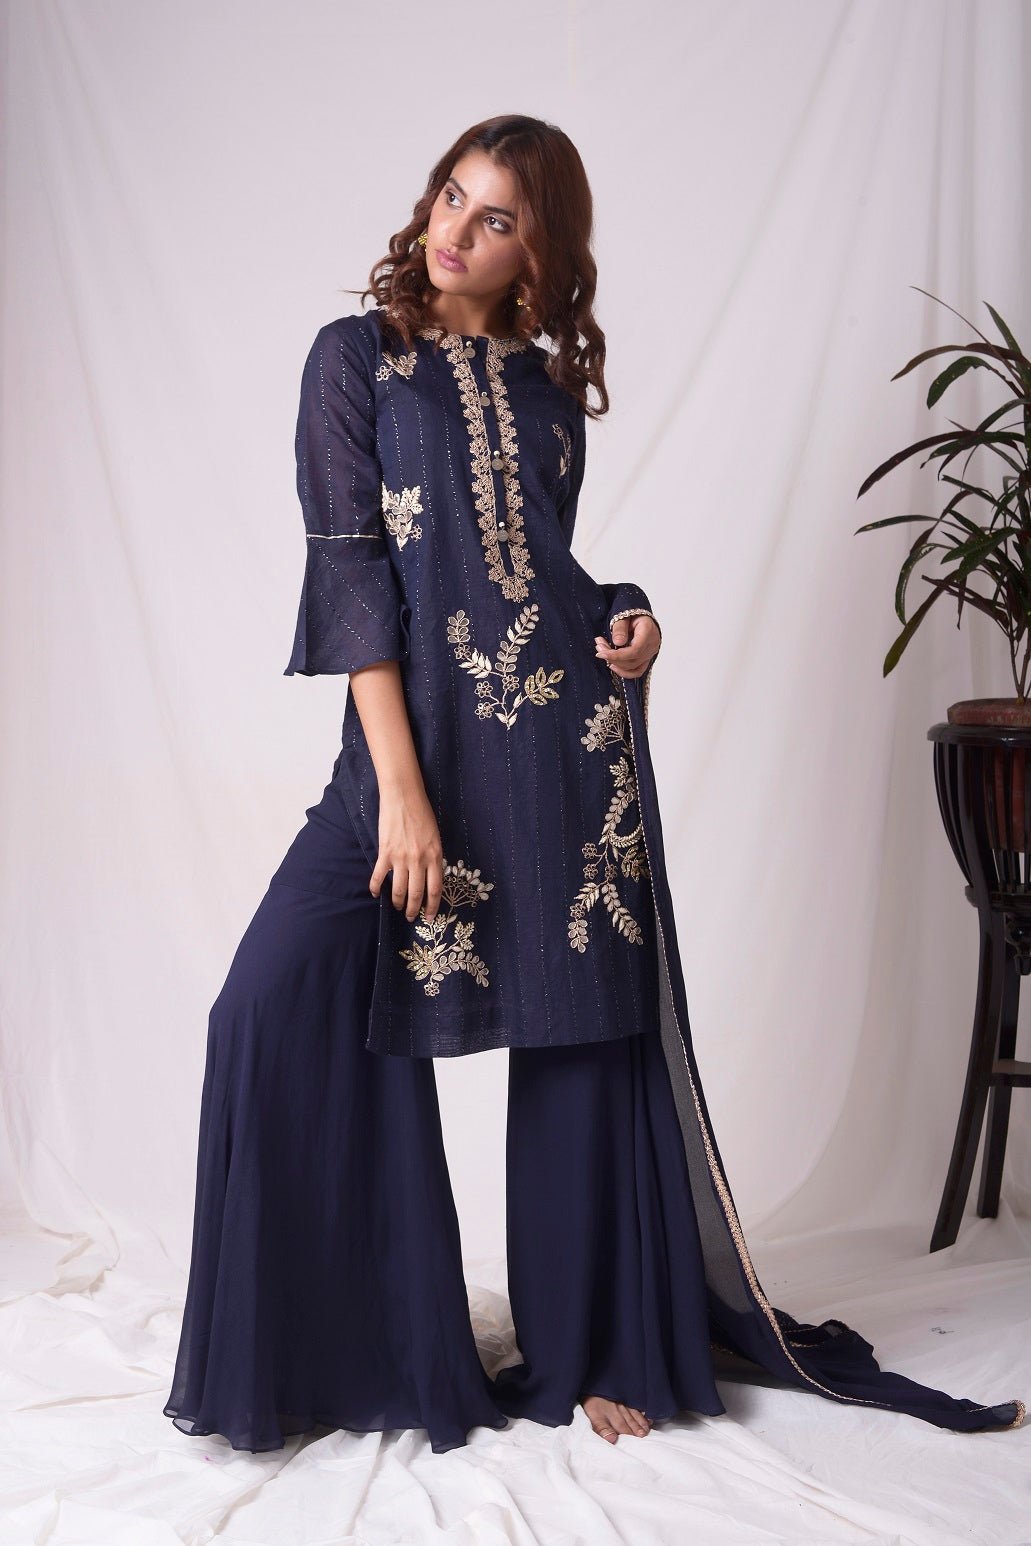 Buy cobalt blue chanderi suit online in USA. Suit has simple gotta patti work,circular flounce sleeves with delicate design,complementing palazzo and duppatta. Simple look makes it elegant.Be the talk of parties and weddings with exquisite designer gowns from Pure Elegance Indian clothing store in USA. Shop online now.-full view-2